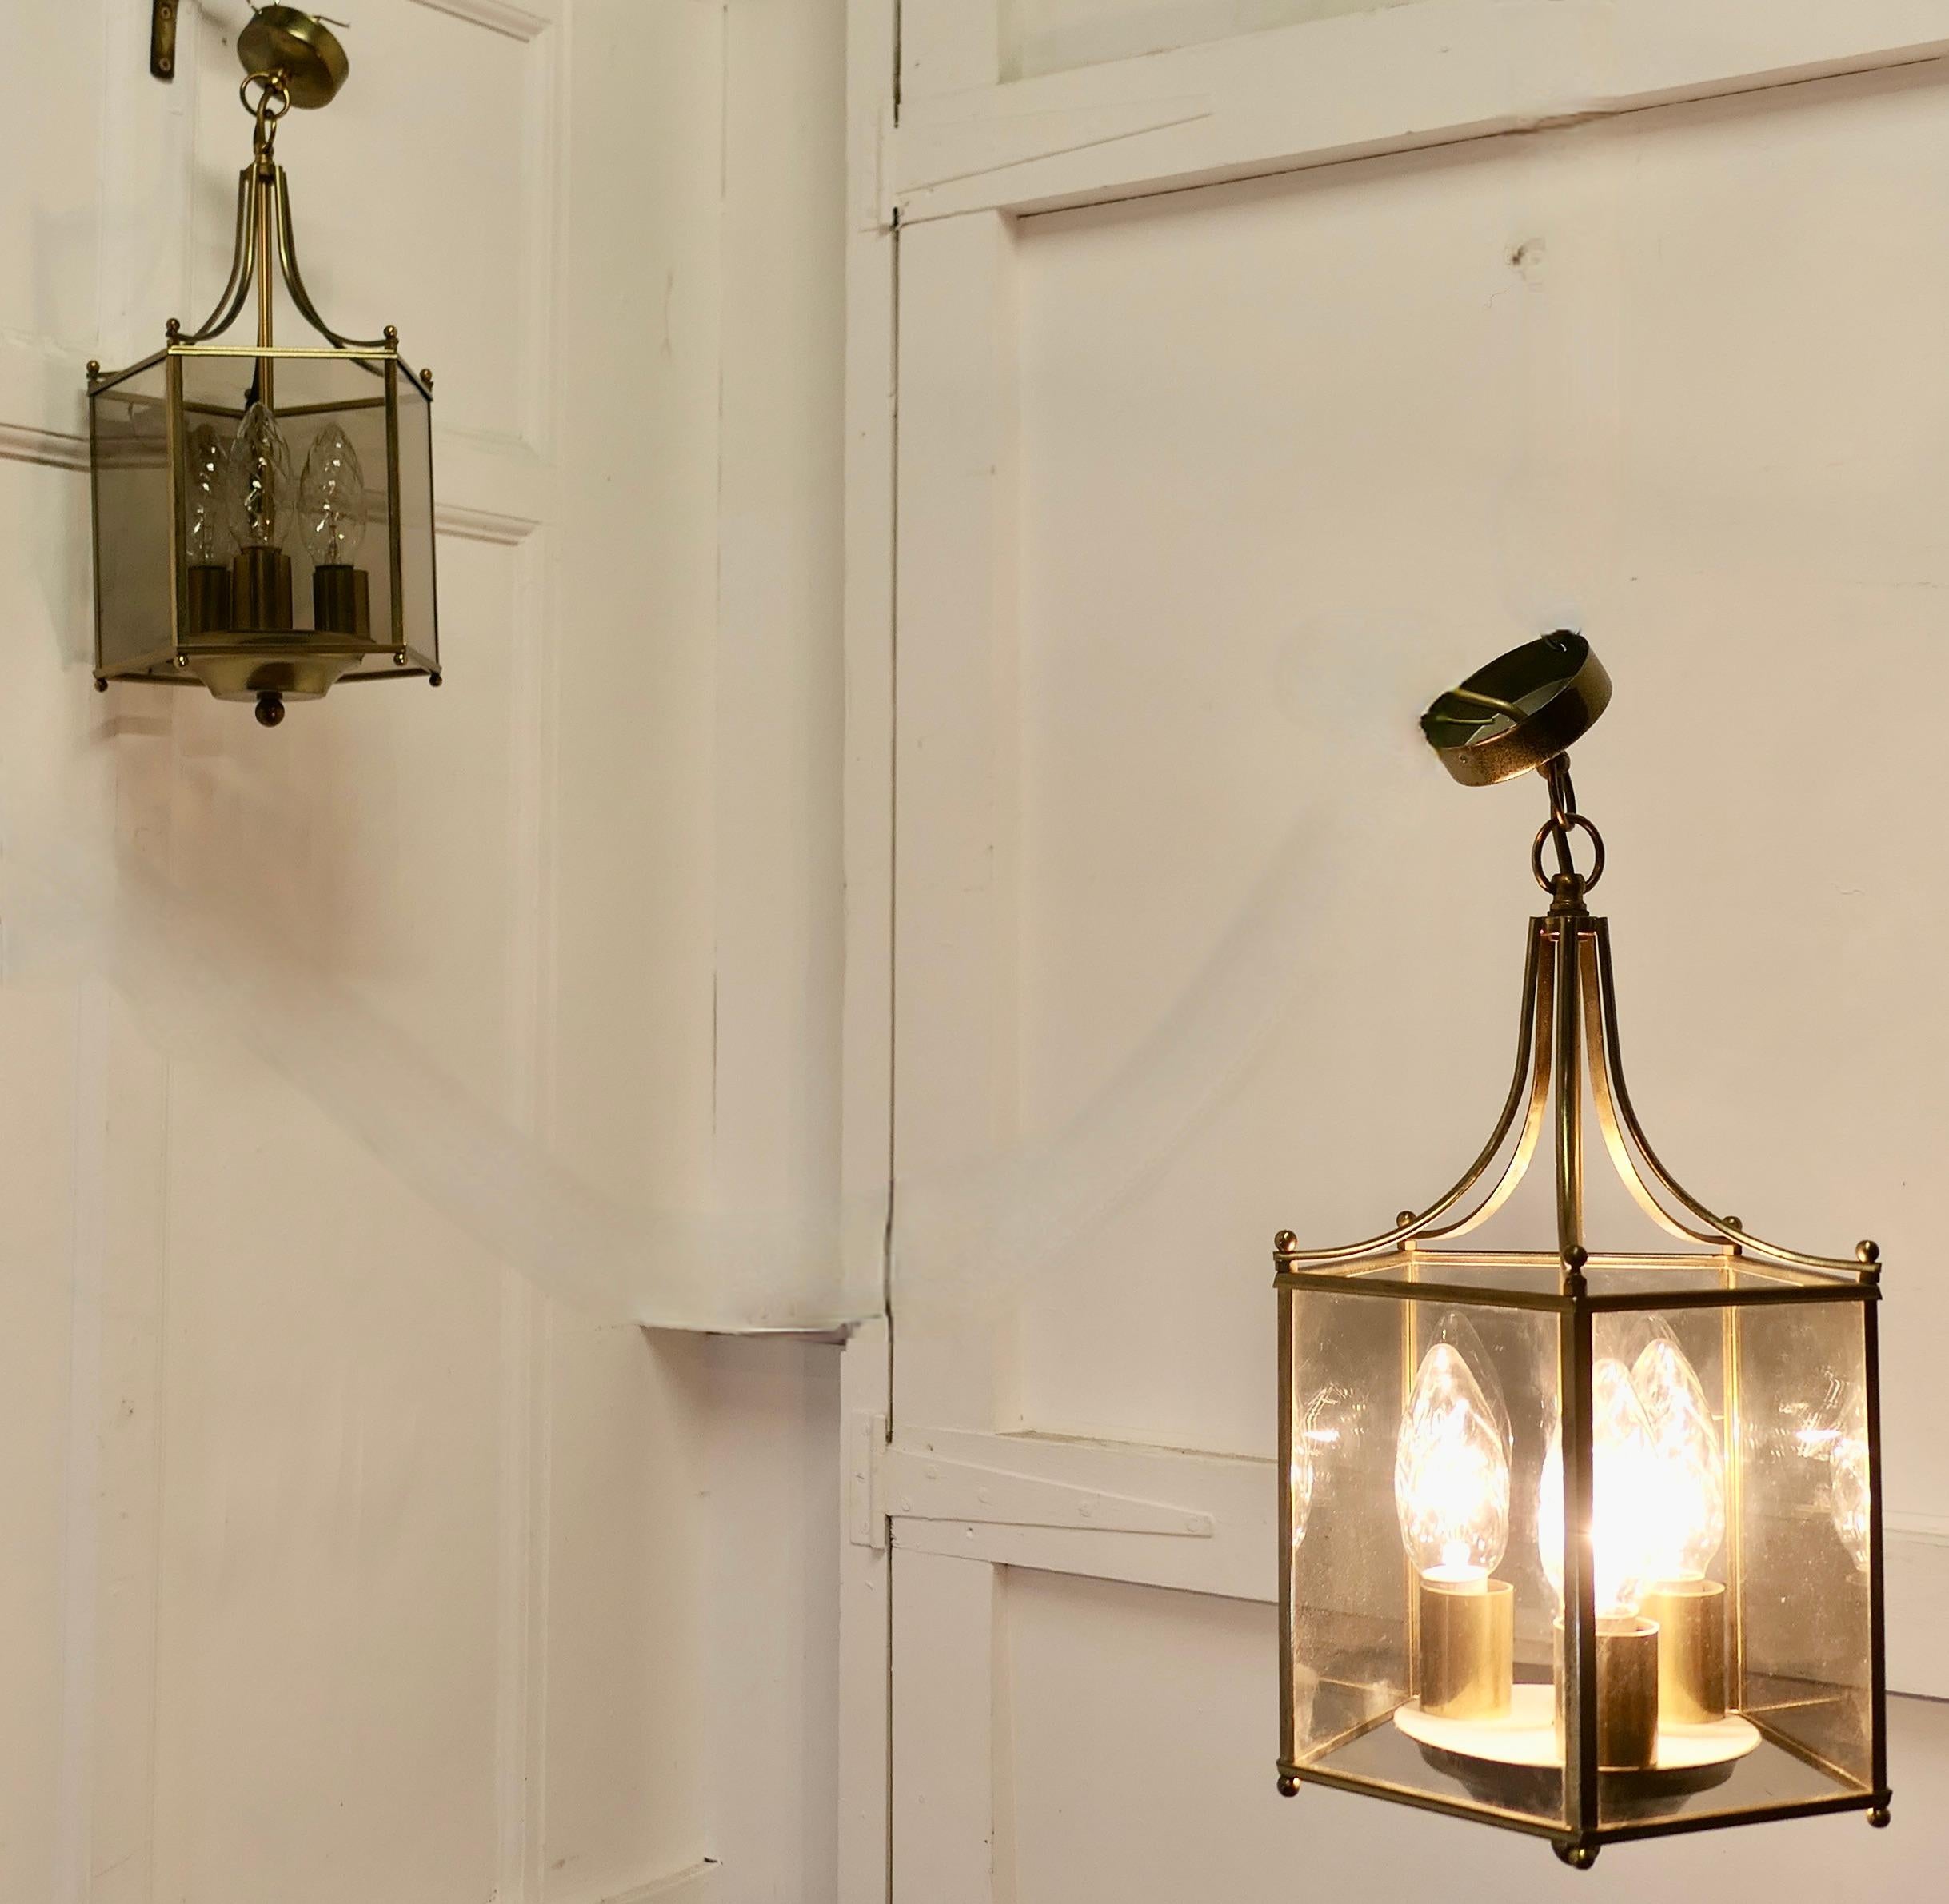 Superb Quality Pair of Art Deco Style Brass and Glass Lanterns      In Good Condition For Sale In Chillerton, Isle of Wight